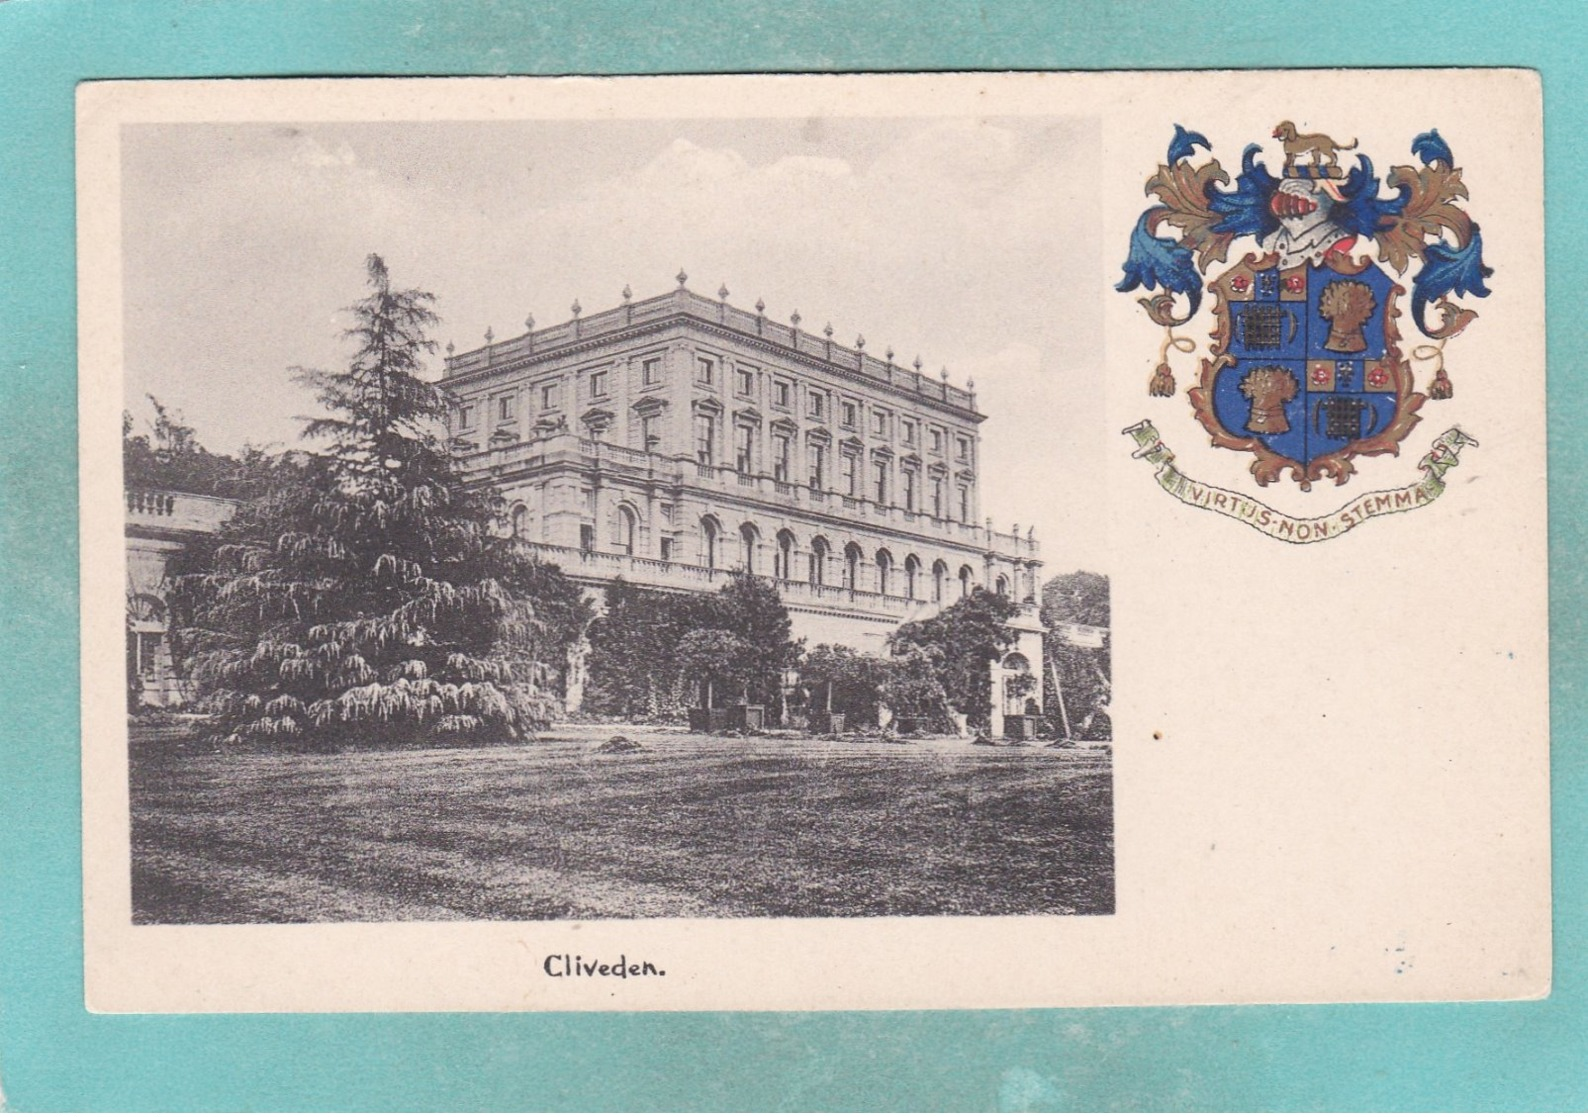 Small Post Card With Coat Of Arms Of Cliveden,Buckinghamshire,S71. - Buckinghamshire